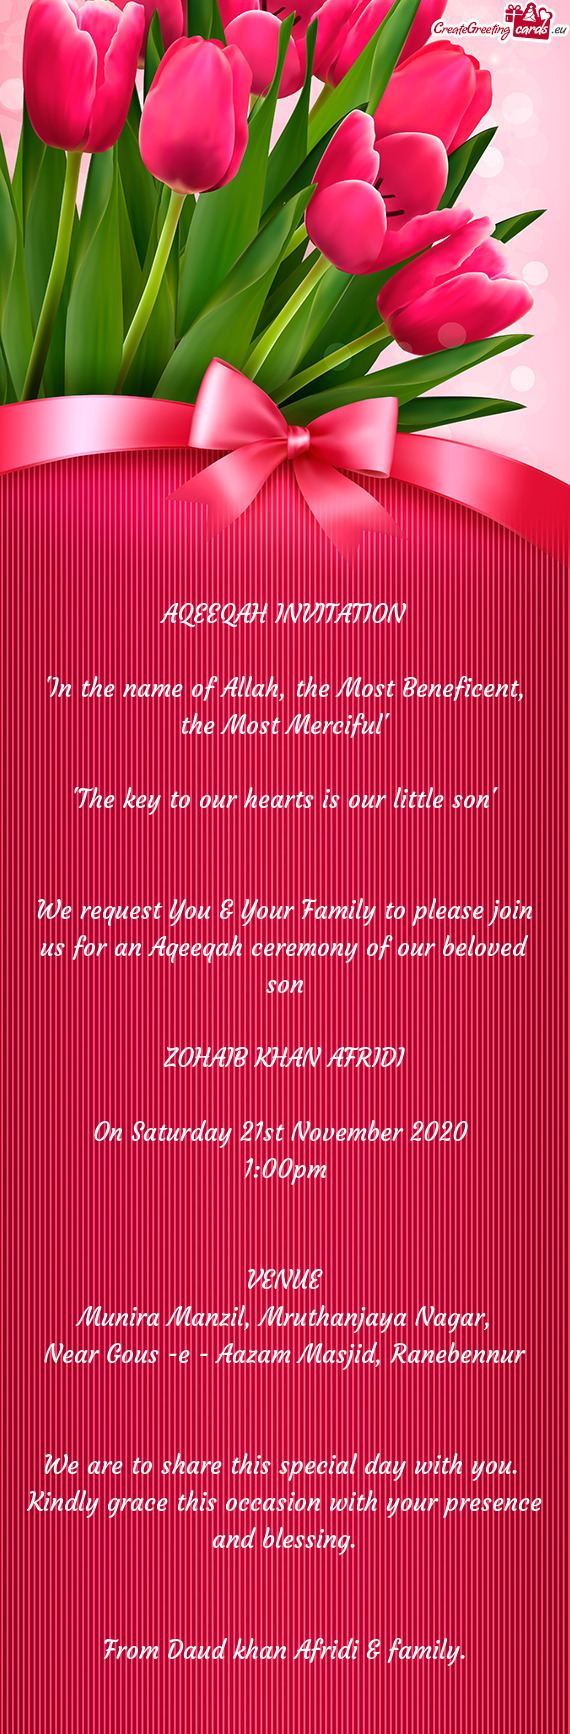 We request You & Your Family to please join us for an Aqeeqah ceremony of our beloved son